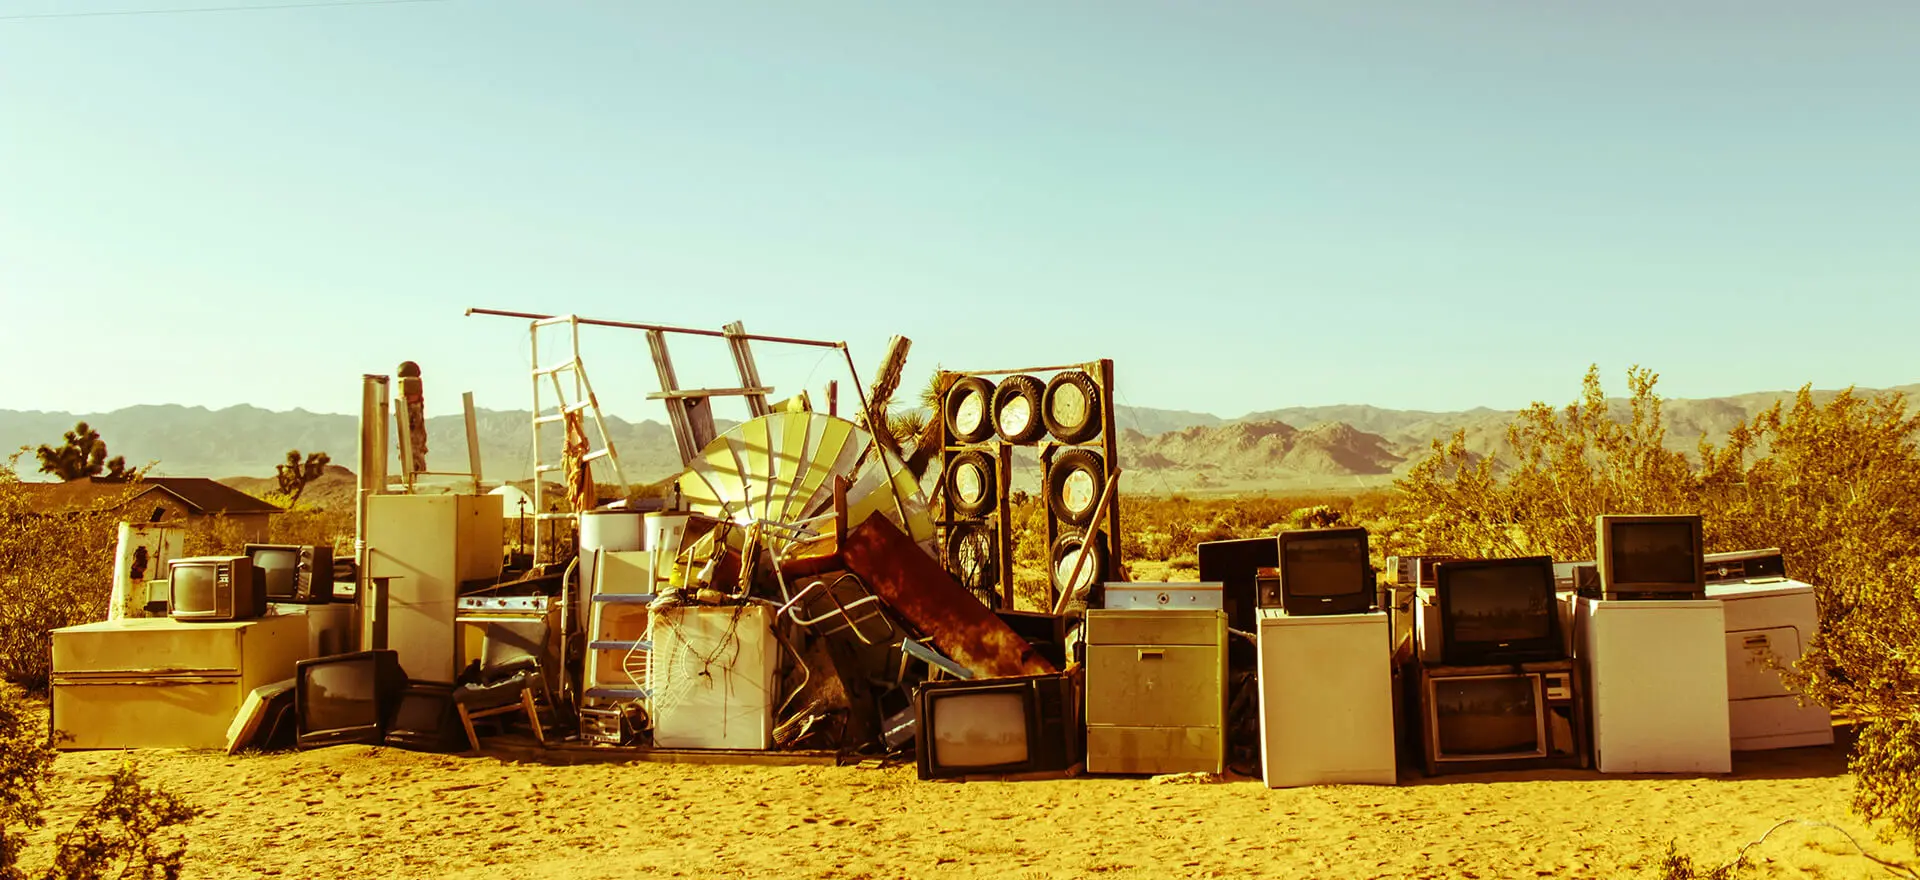 A pile of junk sitting in the middle of nowhere.